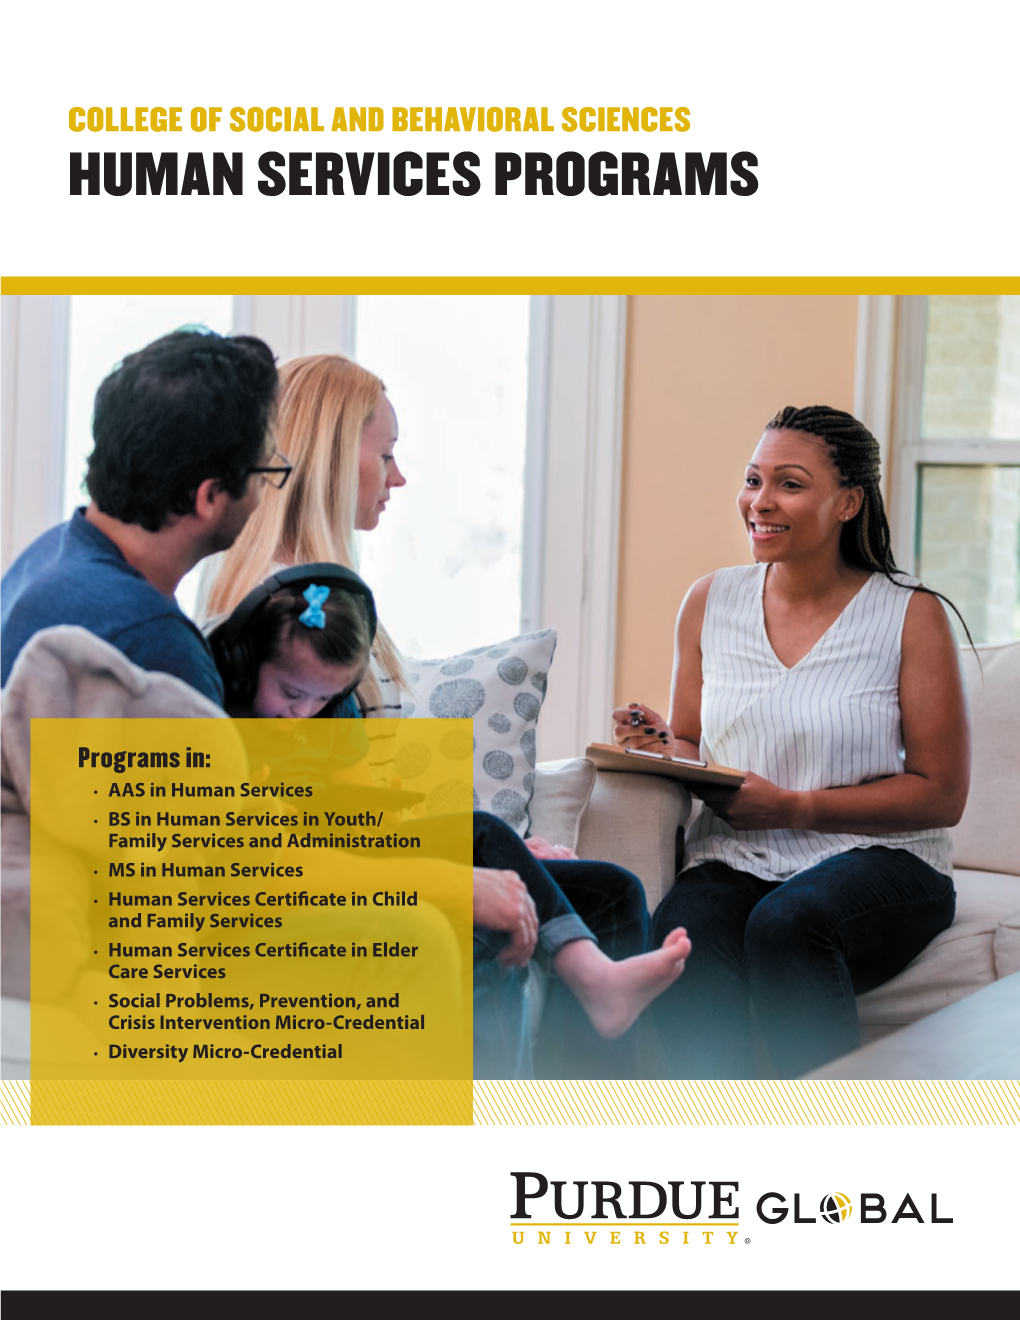 College of Social and Behavioral Sciences Human Services Programs